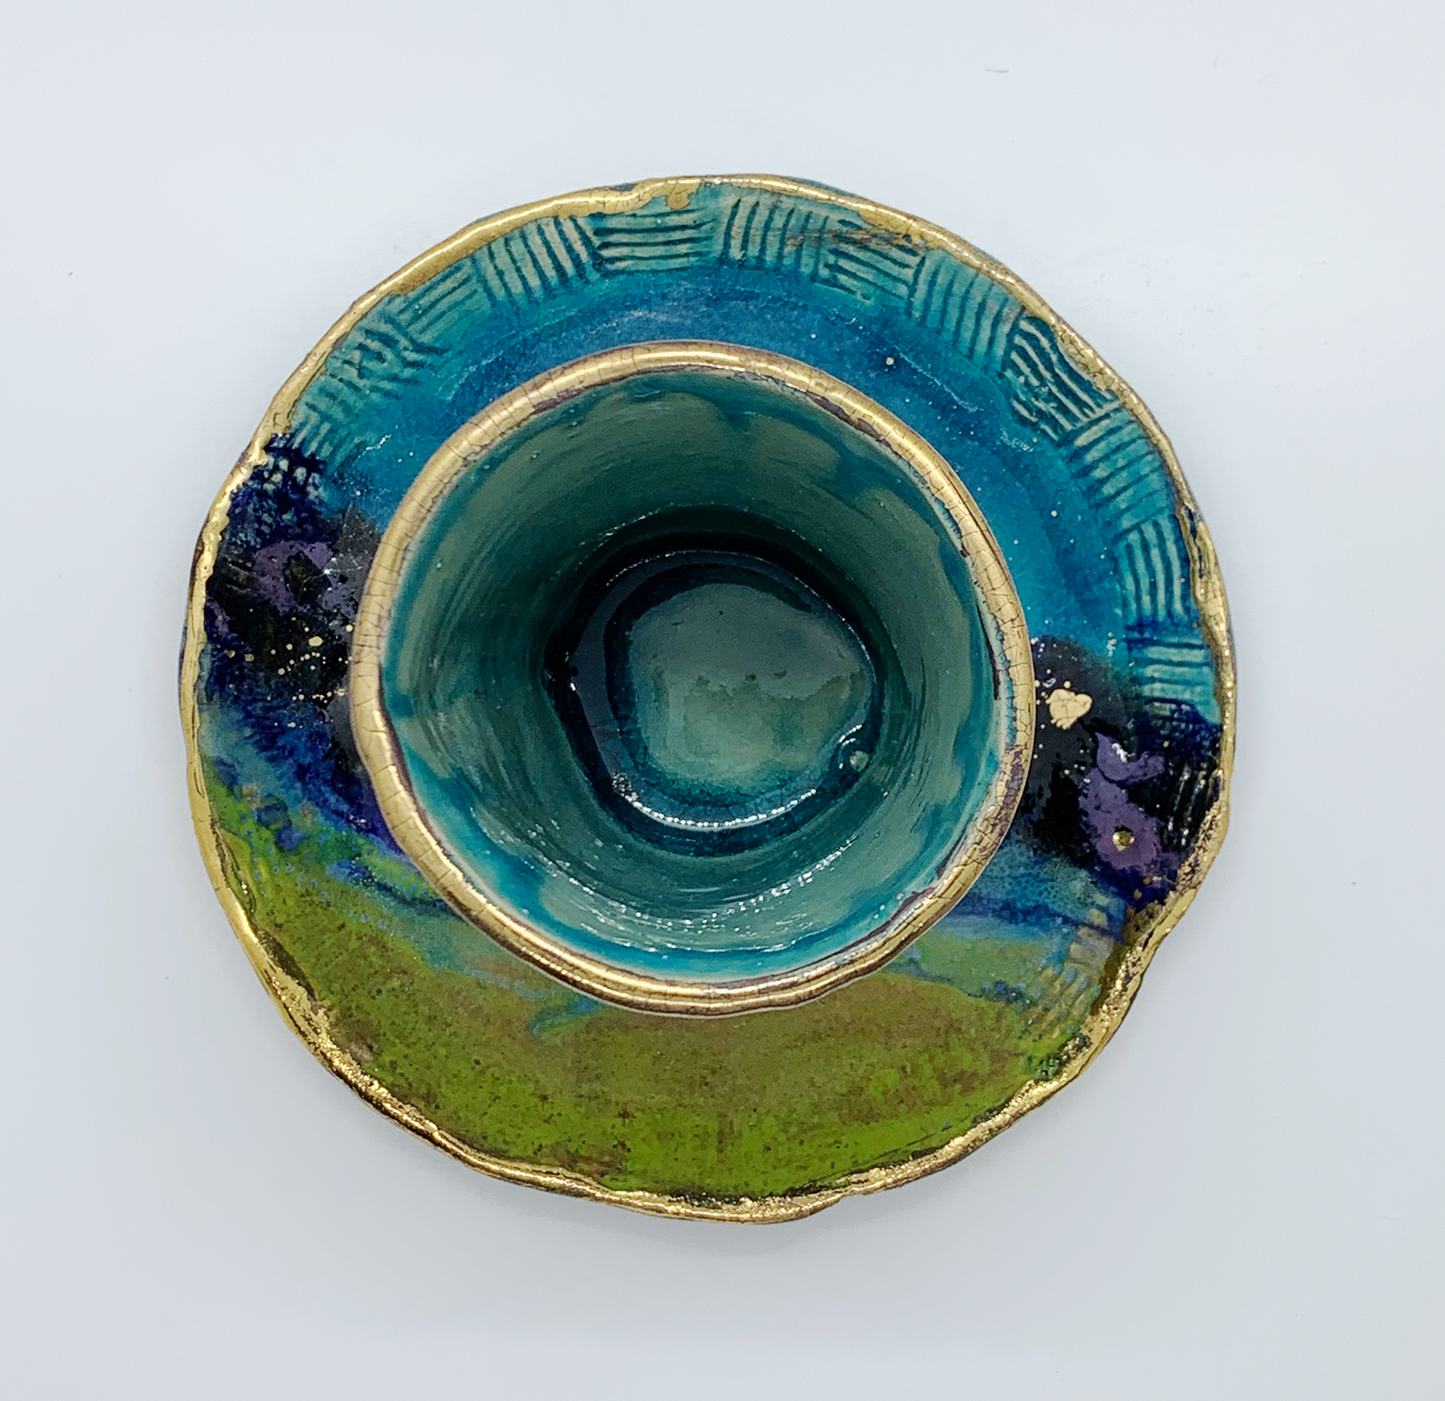 Kiddush Cup - Abstract Landscape in Greens and Blues